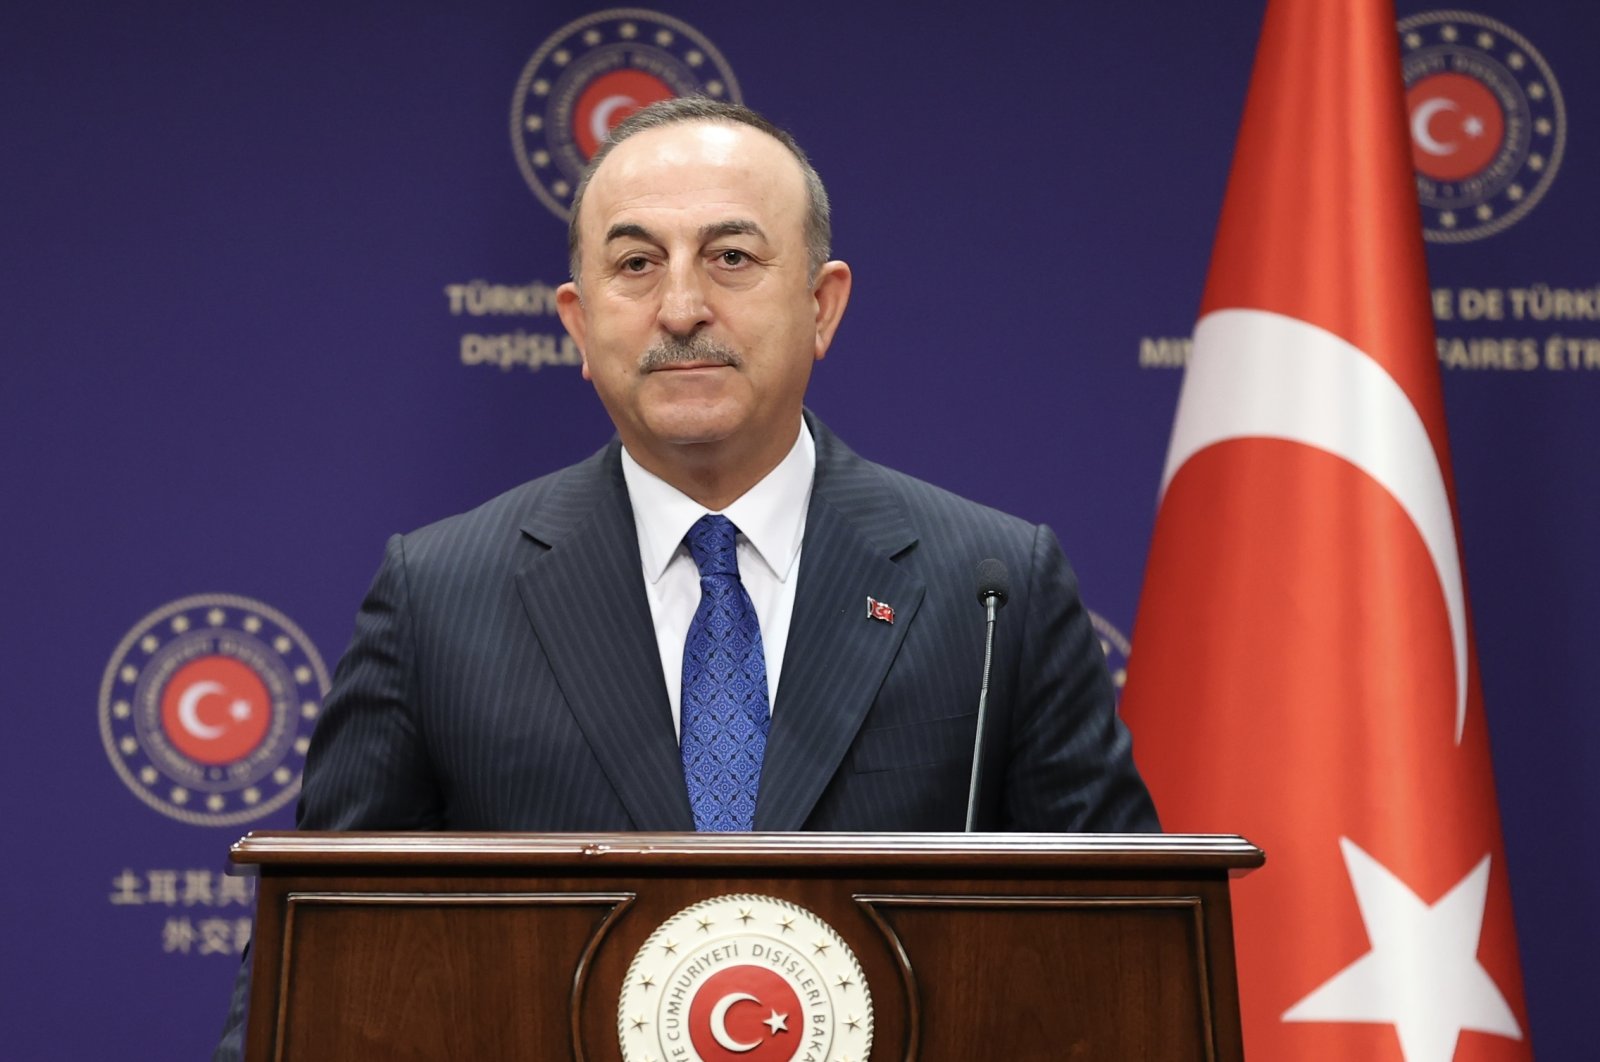 Foreign Minister Mevlüt Çavuşoğlu speaks in a joint news conference with his Hungarian counterpart Peter Szijjarto (unpictured) in Ankara, April 19, 2022. (AA Photo)